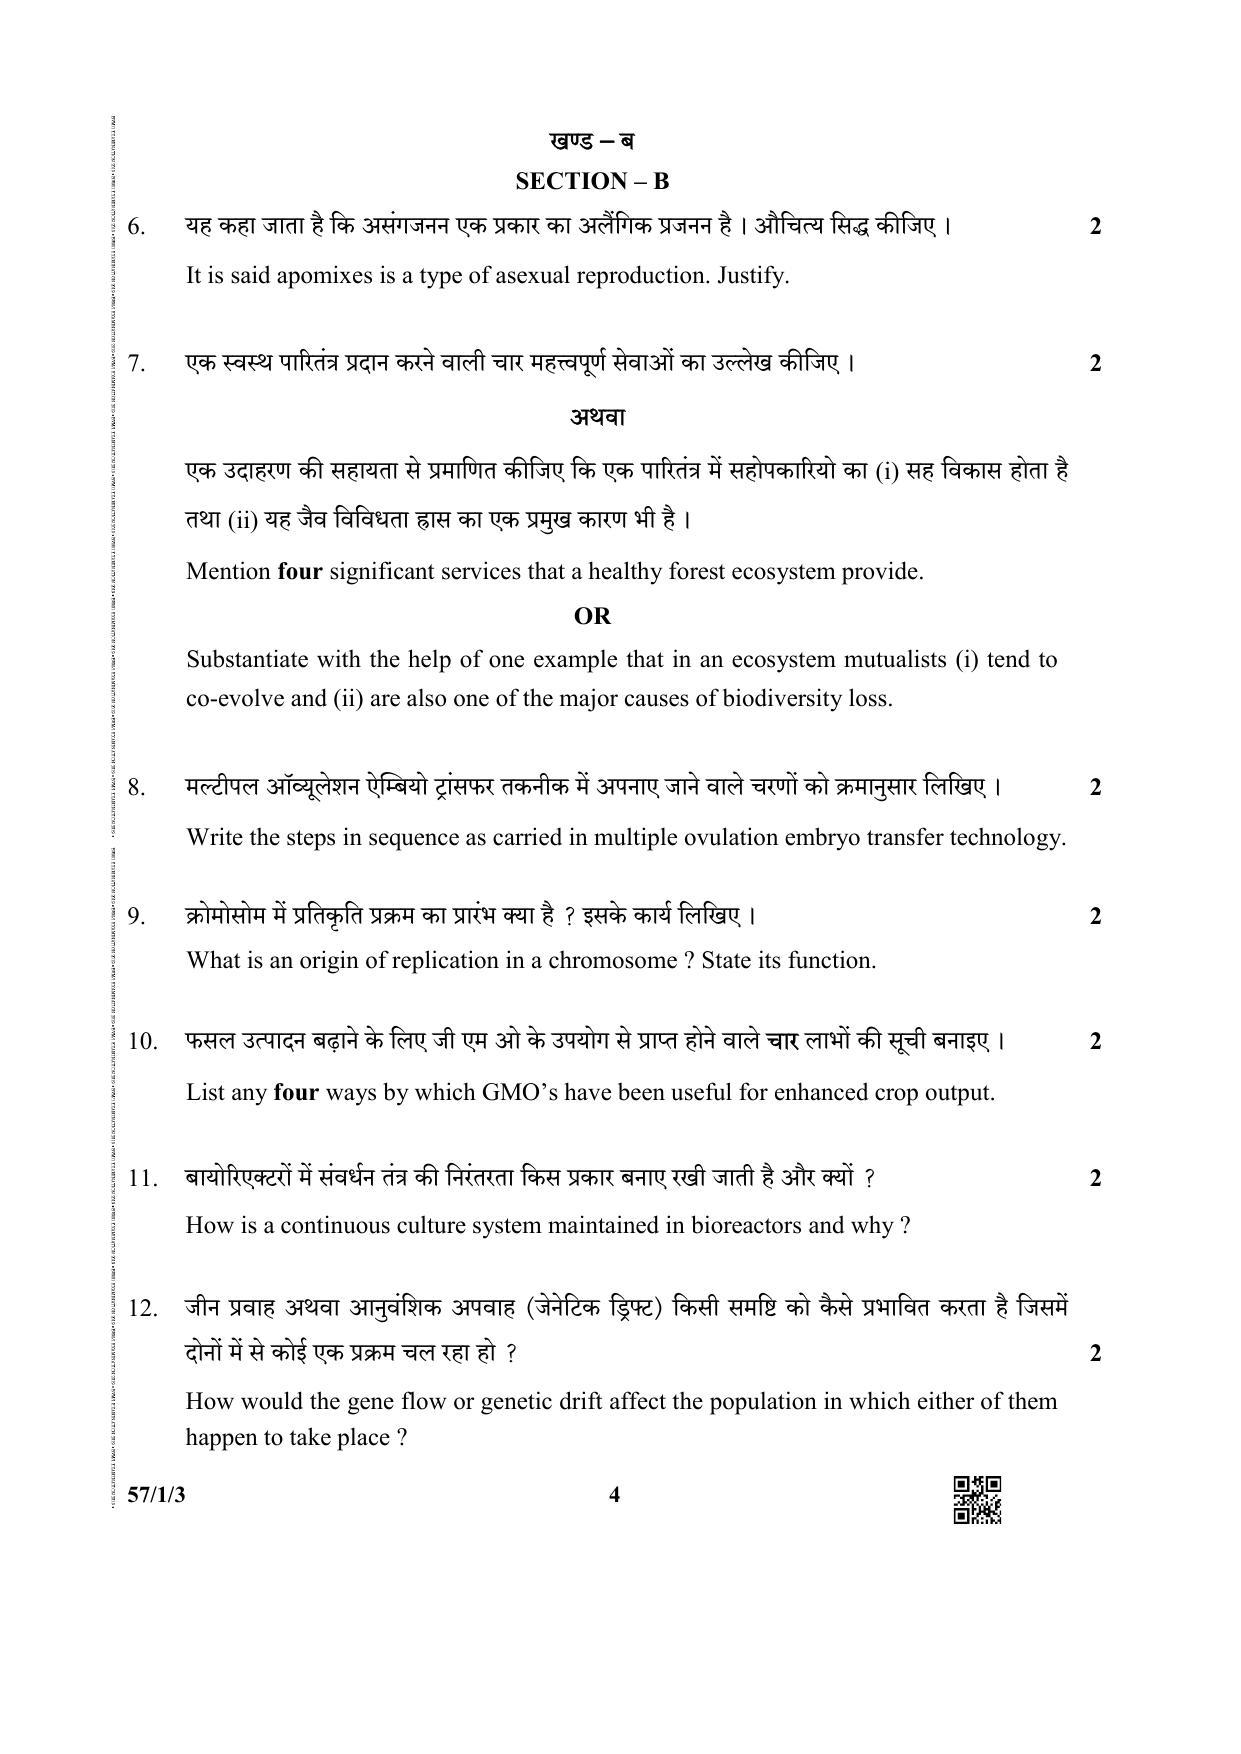 CBSE Class 12 57-3 (Biology) 2019 Question Paper - Page 4